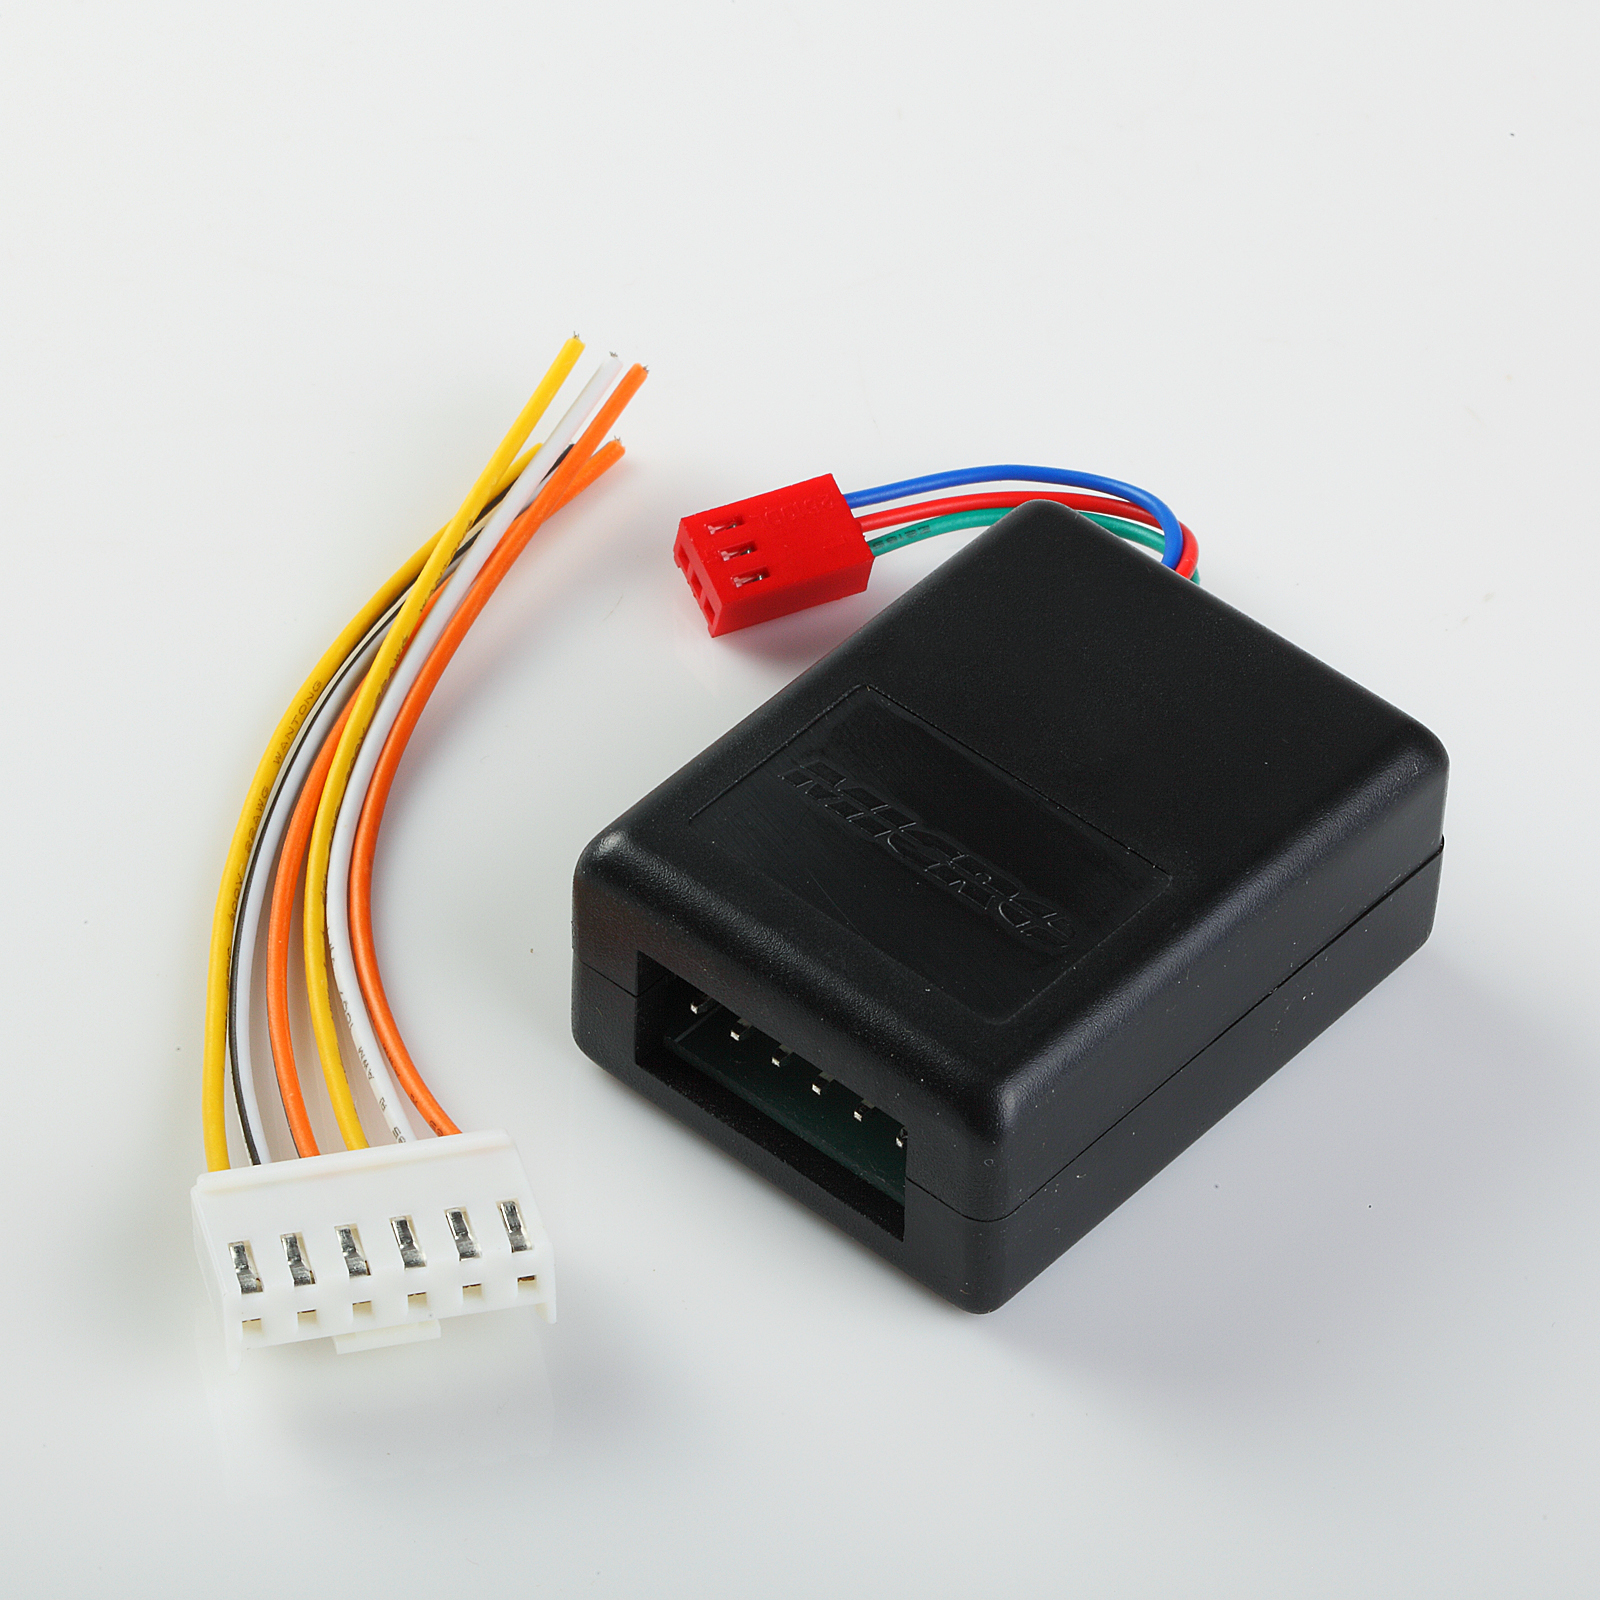 RRAL-DL Universal Door Lock Relay Kit Module Triggered By Negative